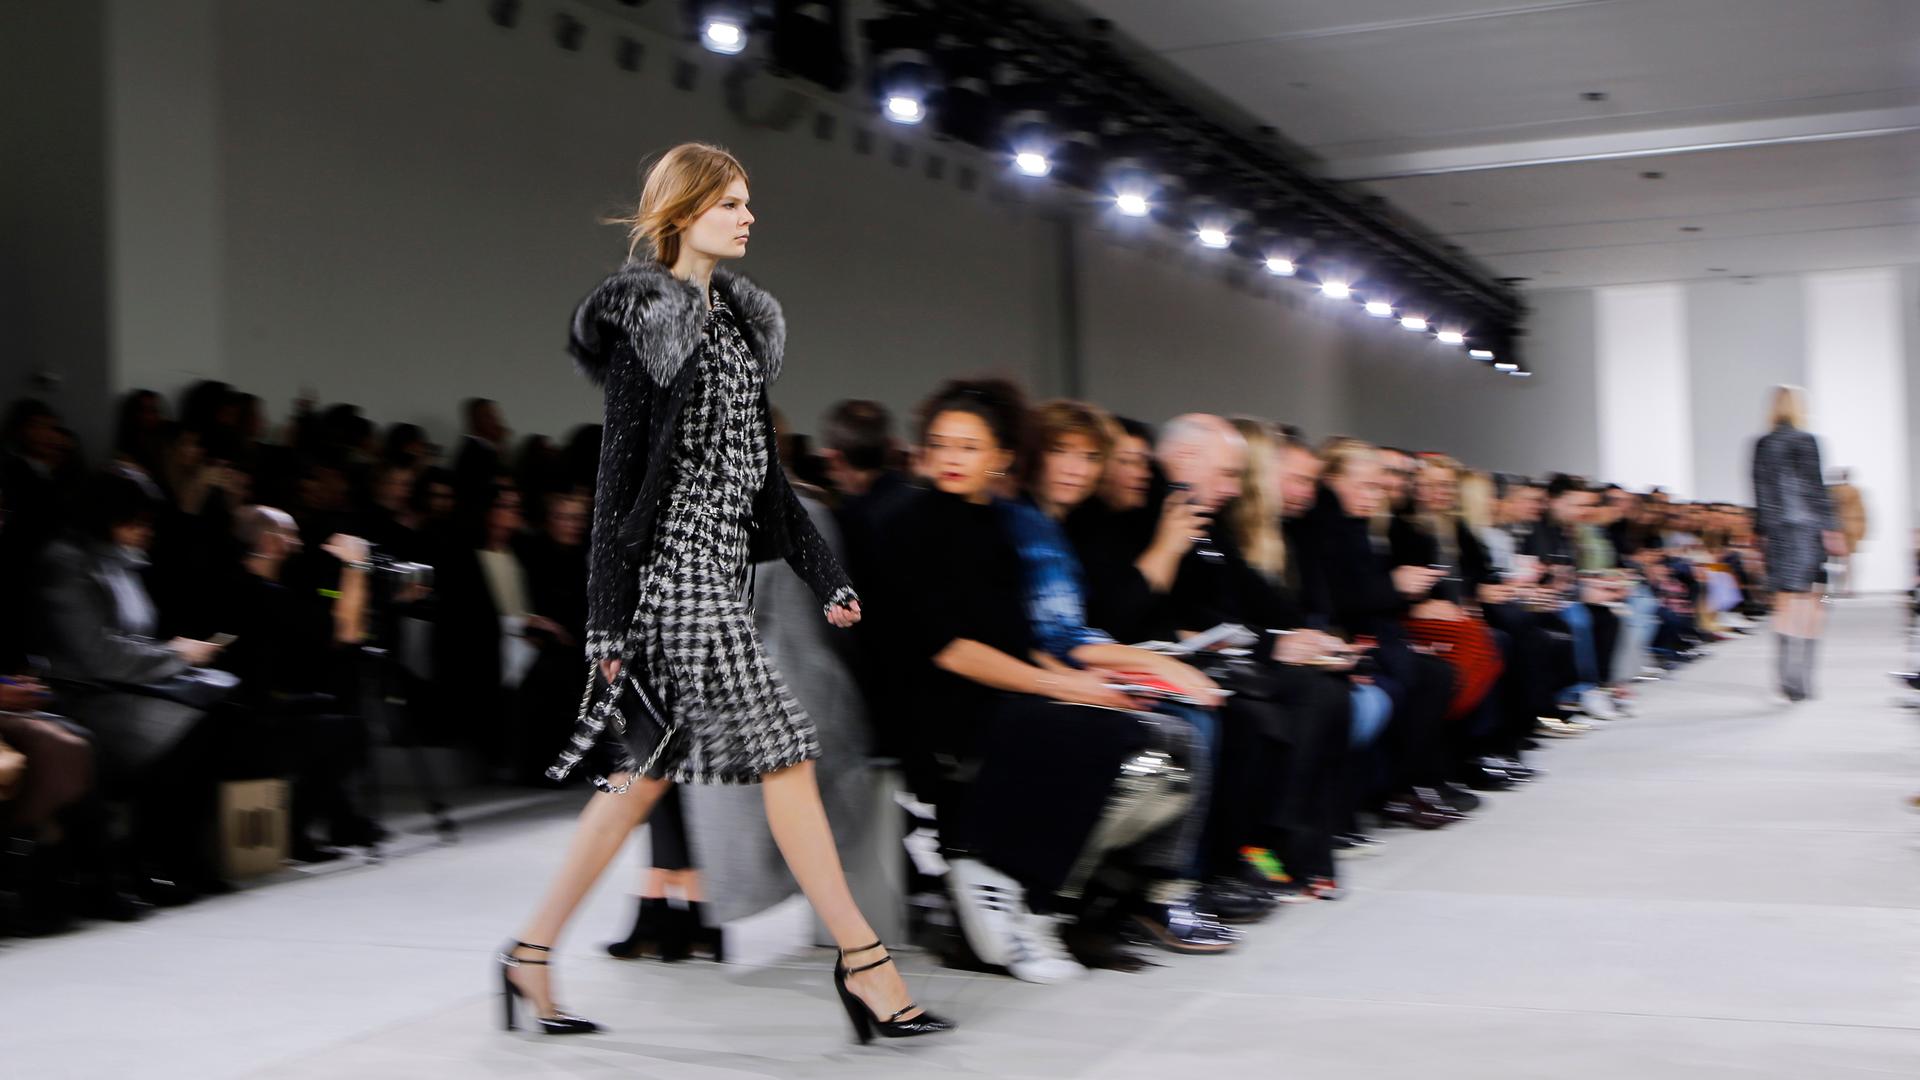 A woman walks on a catwalk around people sitting in chairs